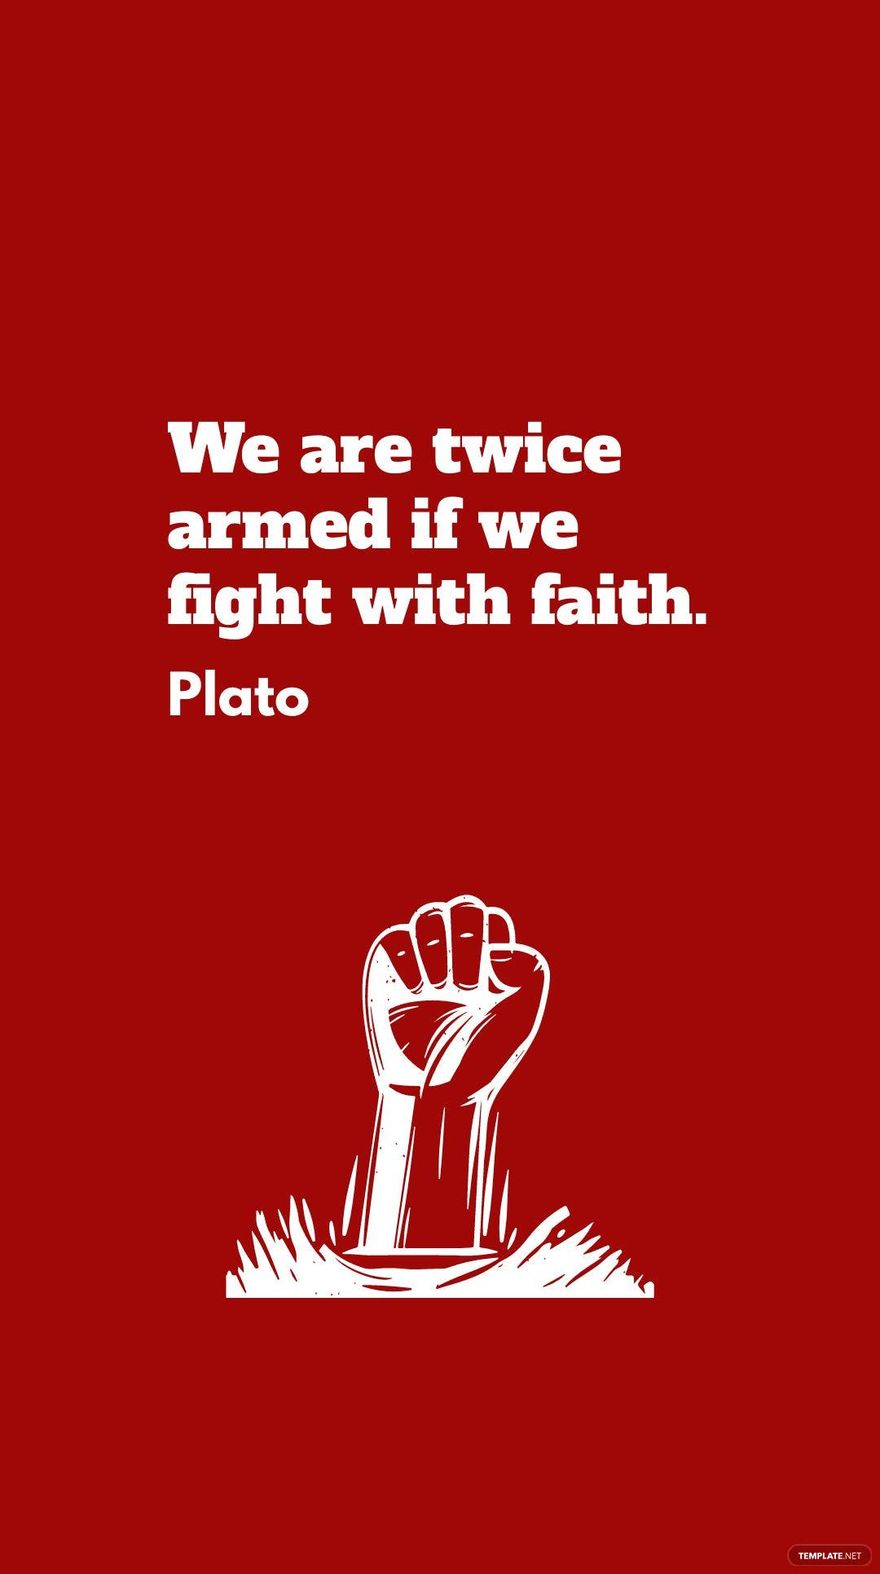 Plato - We are twice armed if we fight with faith.